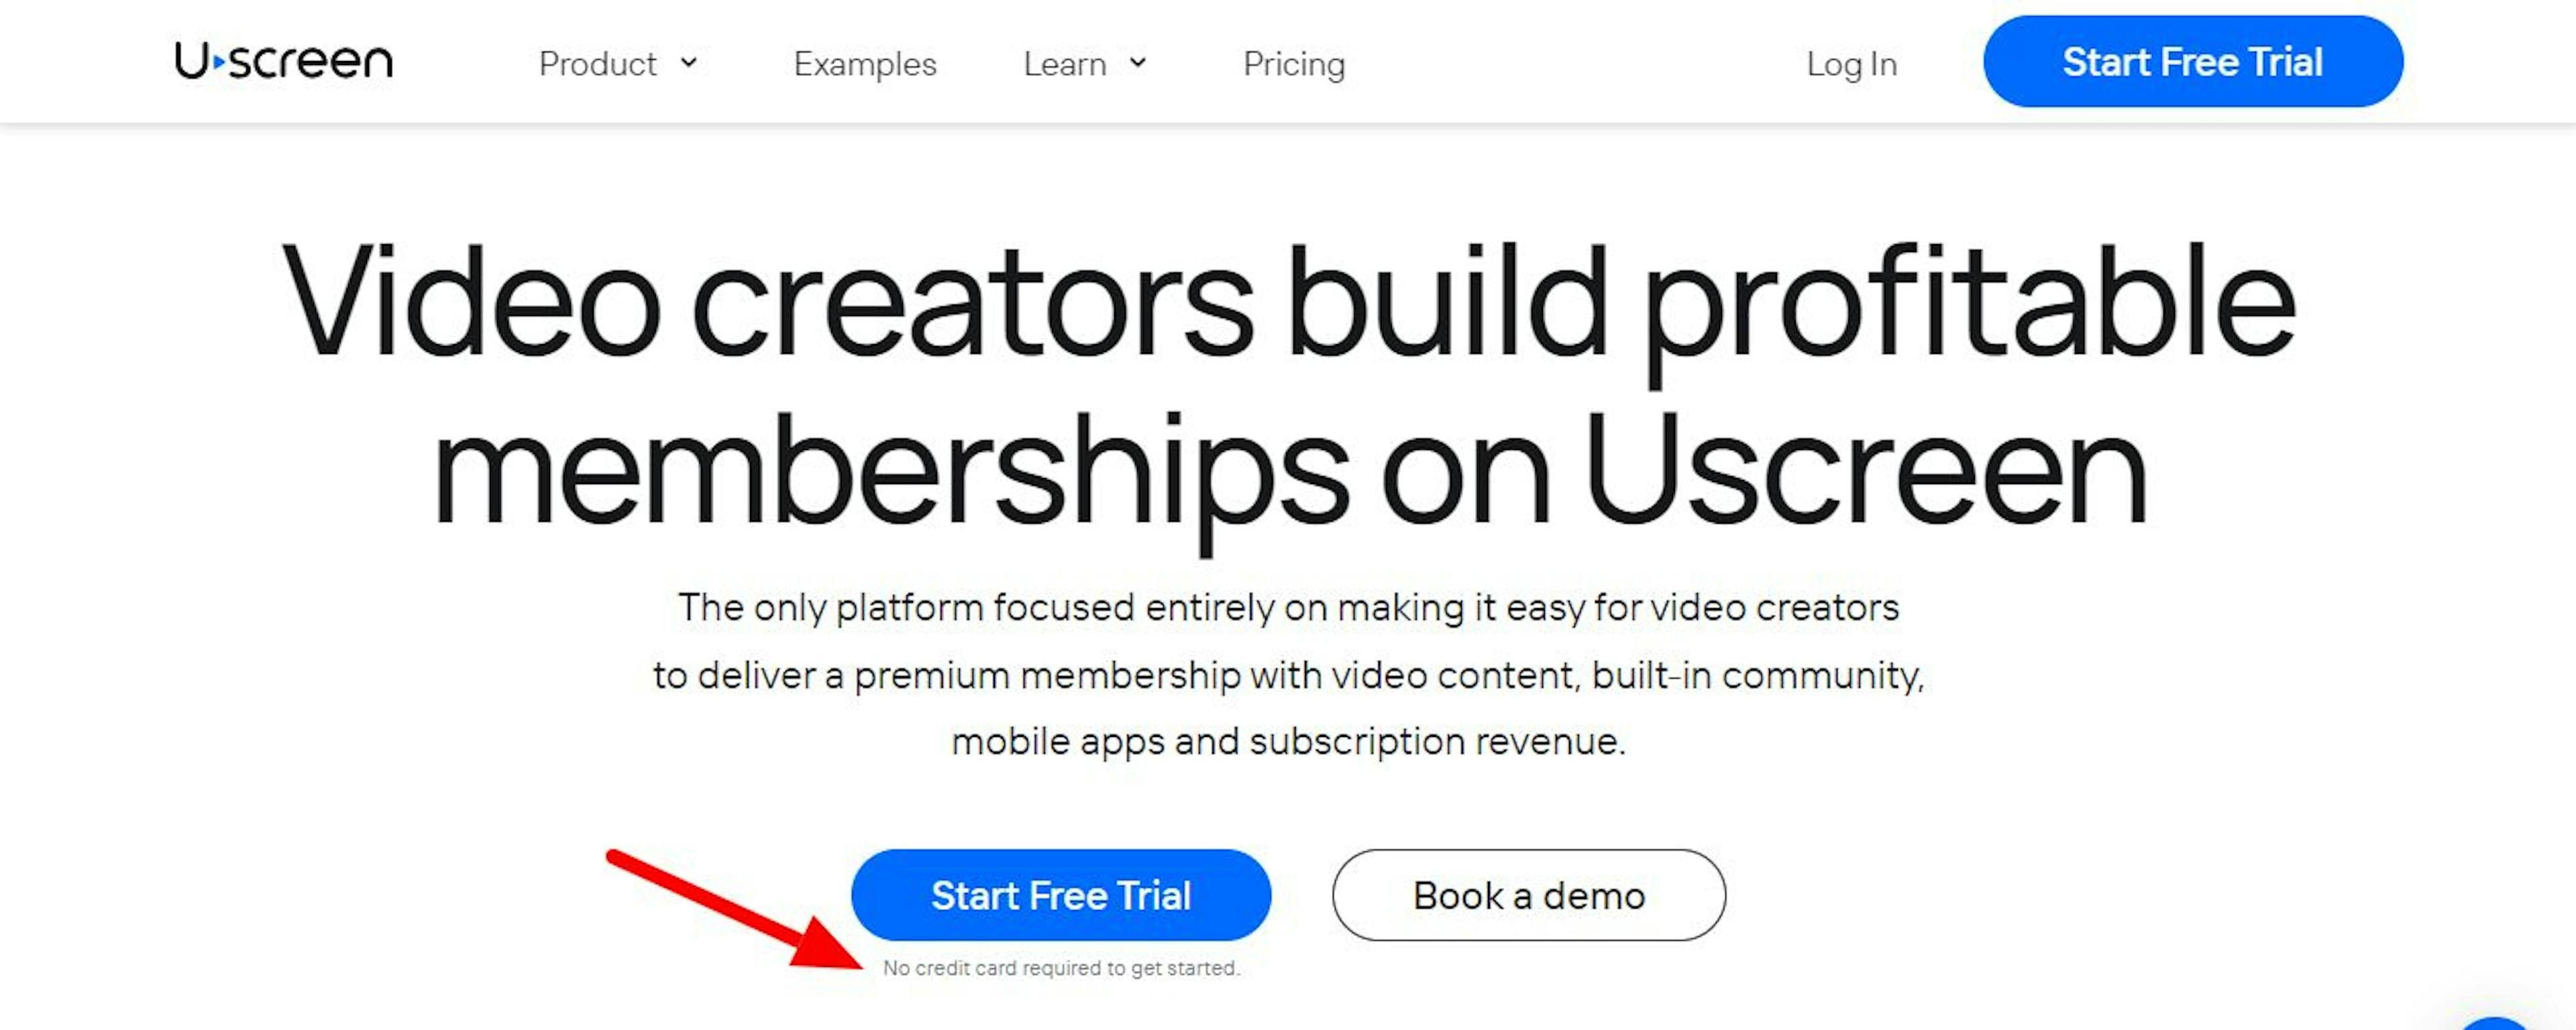 Uscreen's Pricing page